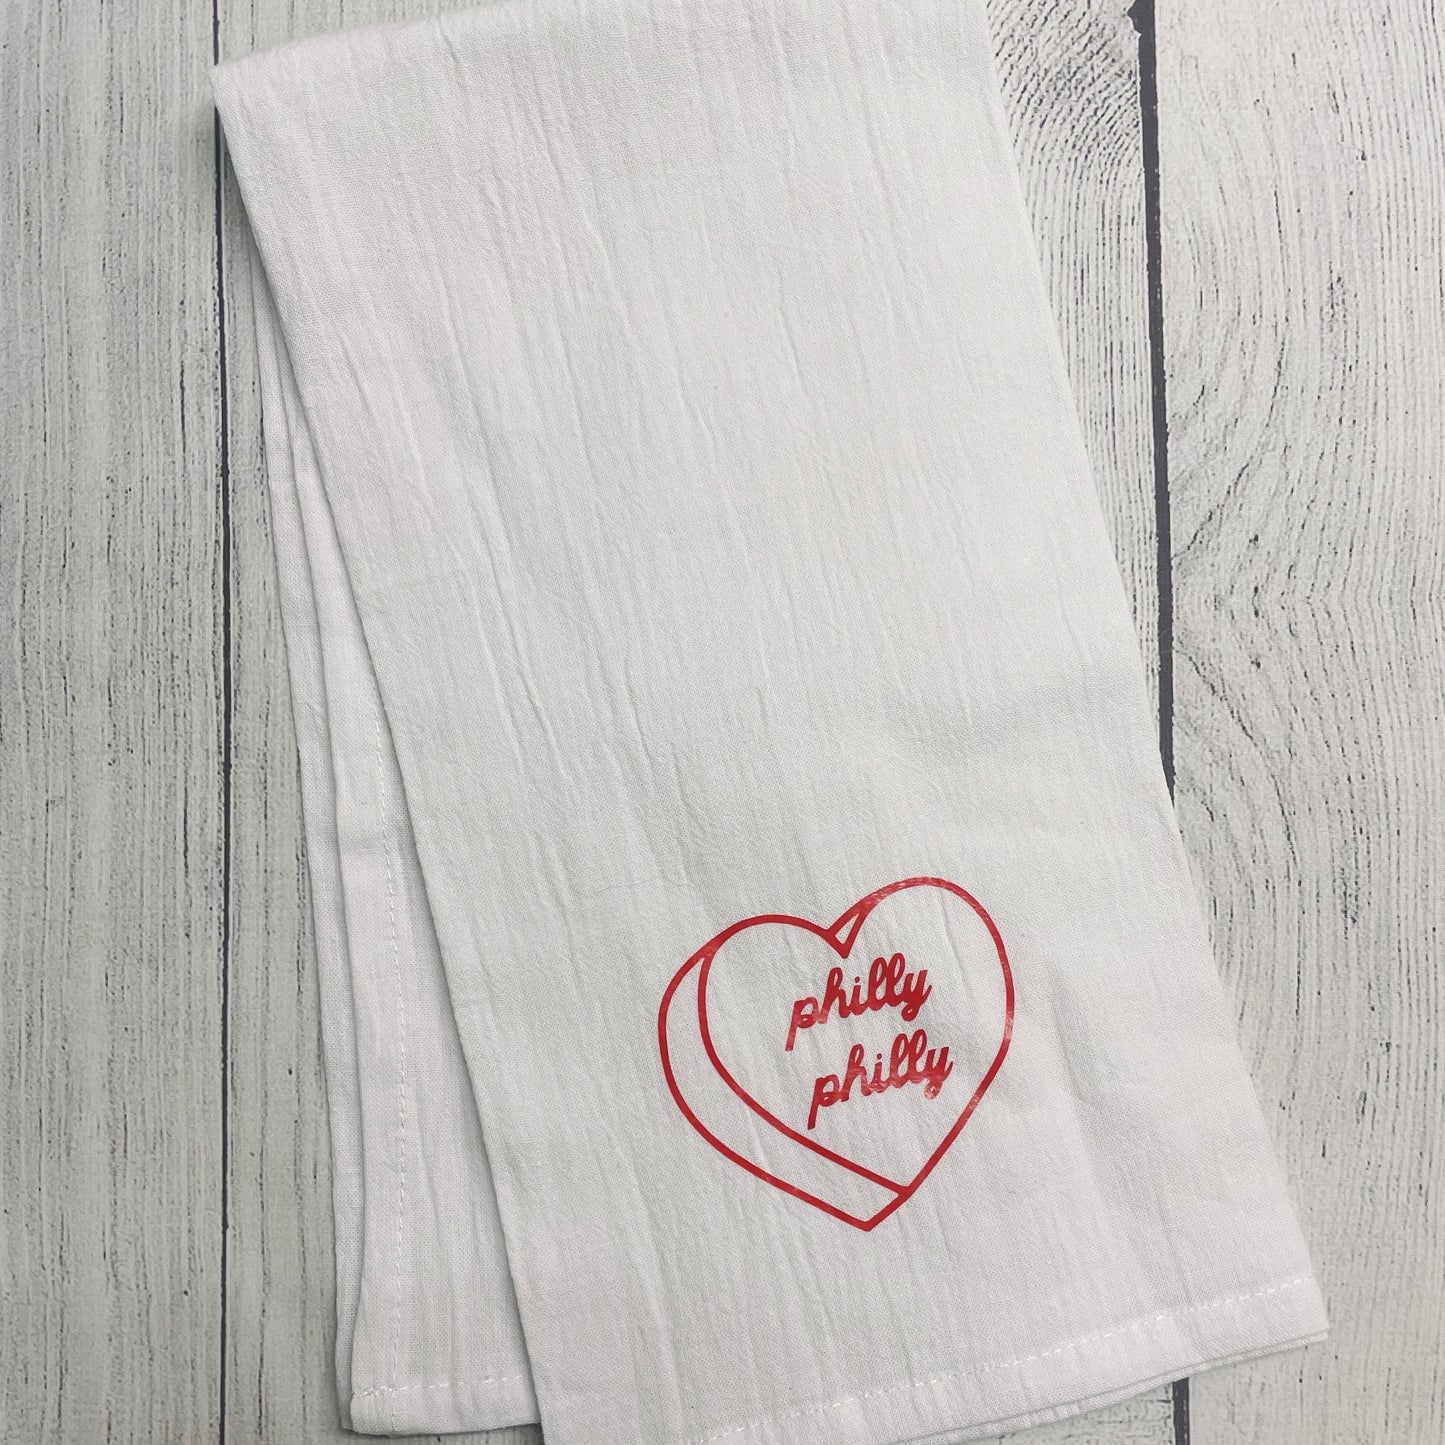 Philly Philly Hand Towel